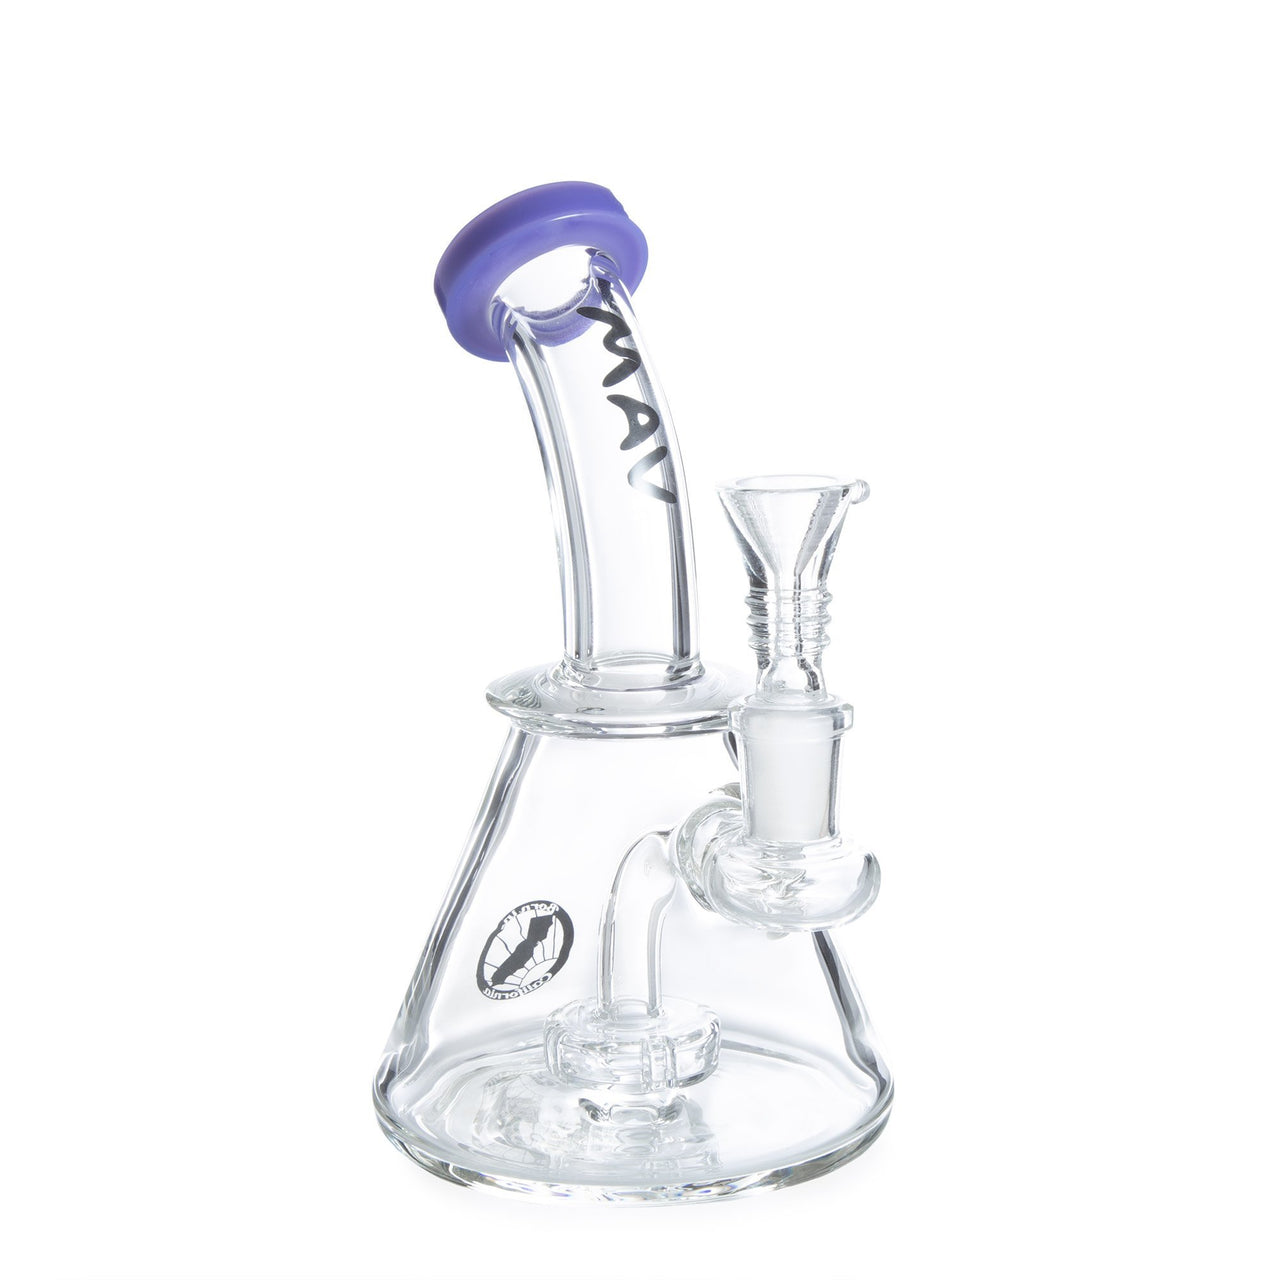 MAV Glass Bent Neck Showerhead Dab Rig - 420 Science - The most trusted online smoke shop.